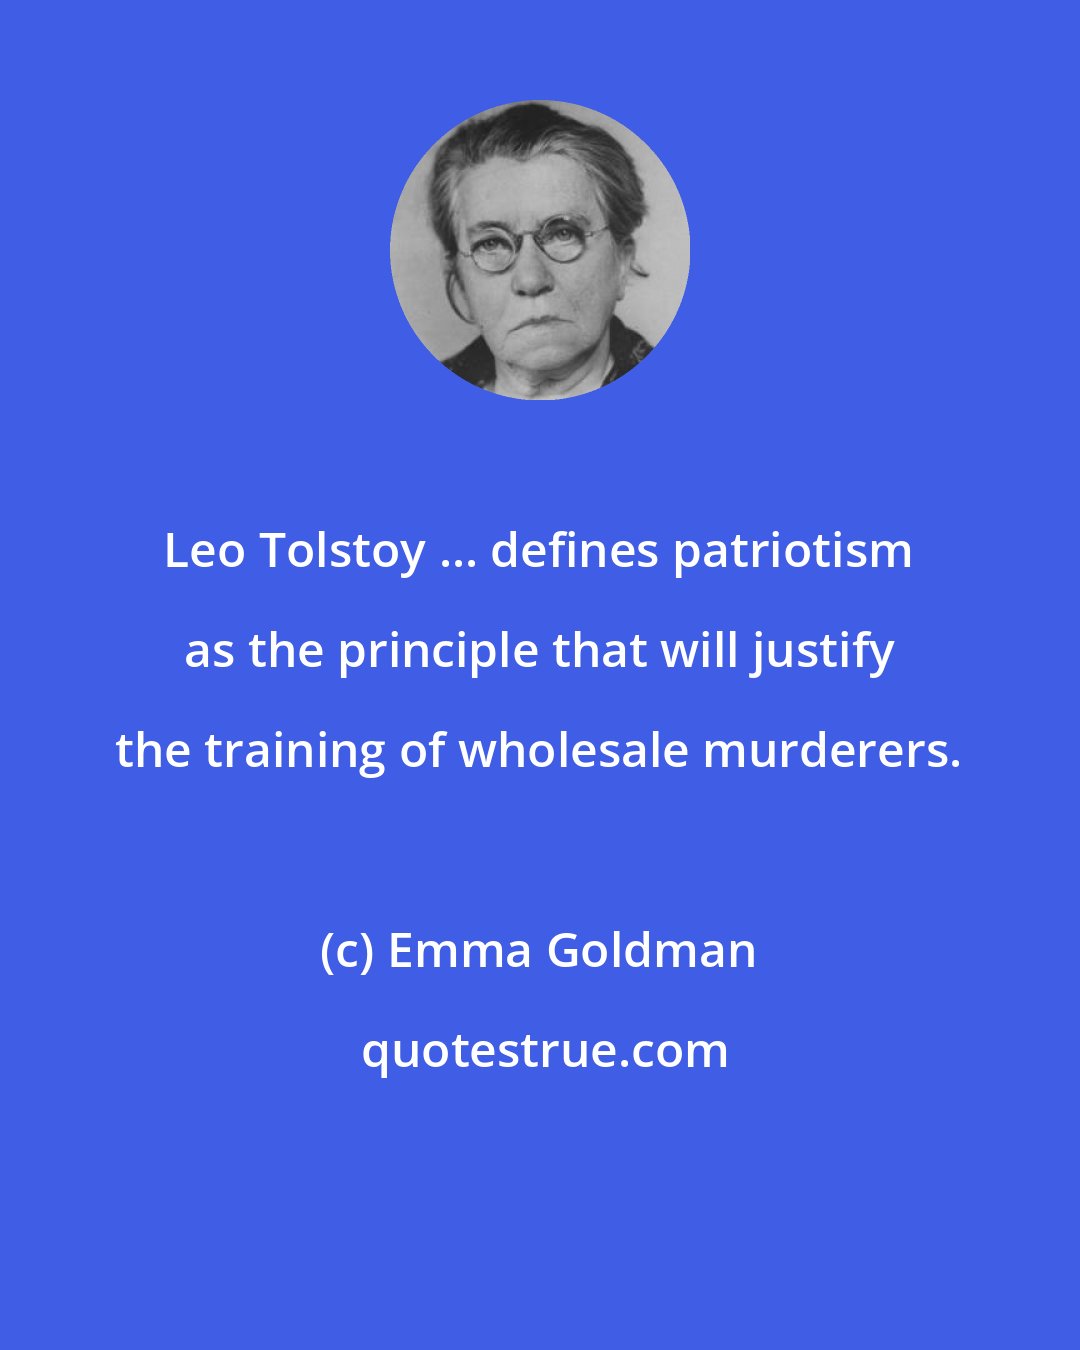 Emma Goldman: Leo Tolstoy ... defines patriotism as the principle that will justify the training of wholesale murderers.